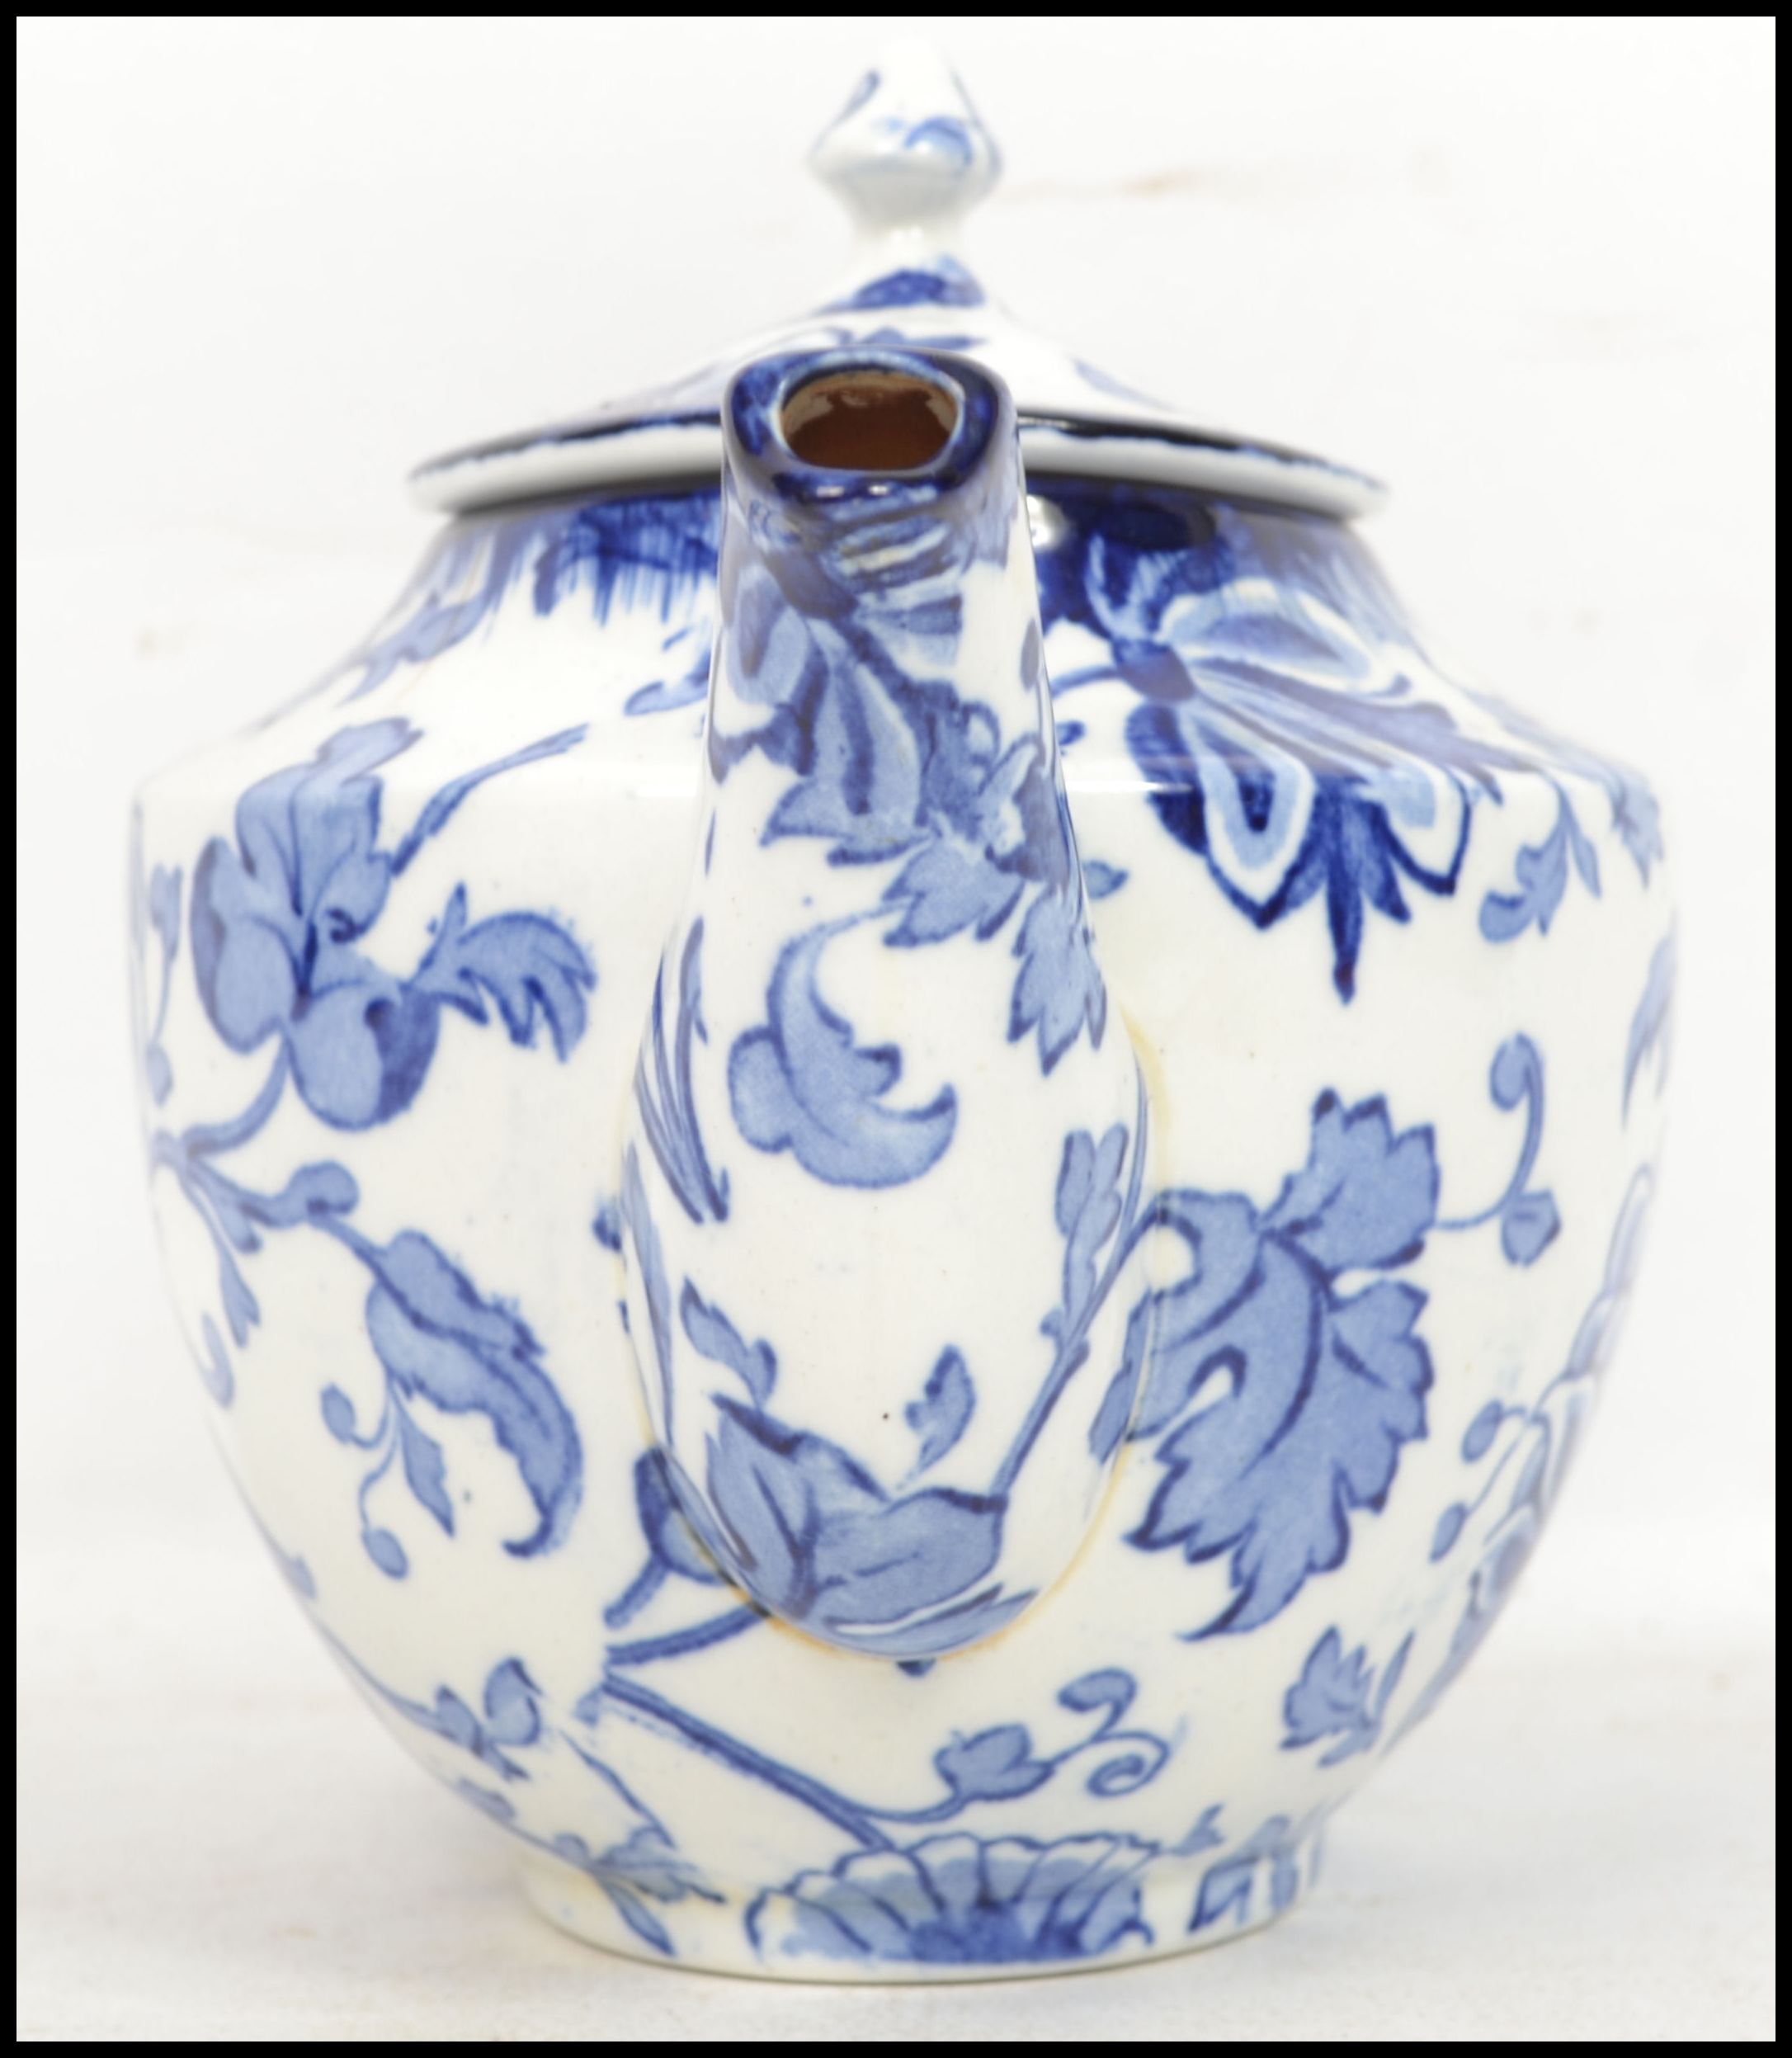 An early 20th century blue and white ceramic teapo - Image 2 of 7